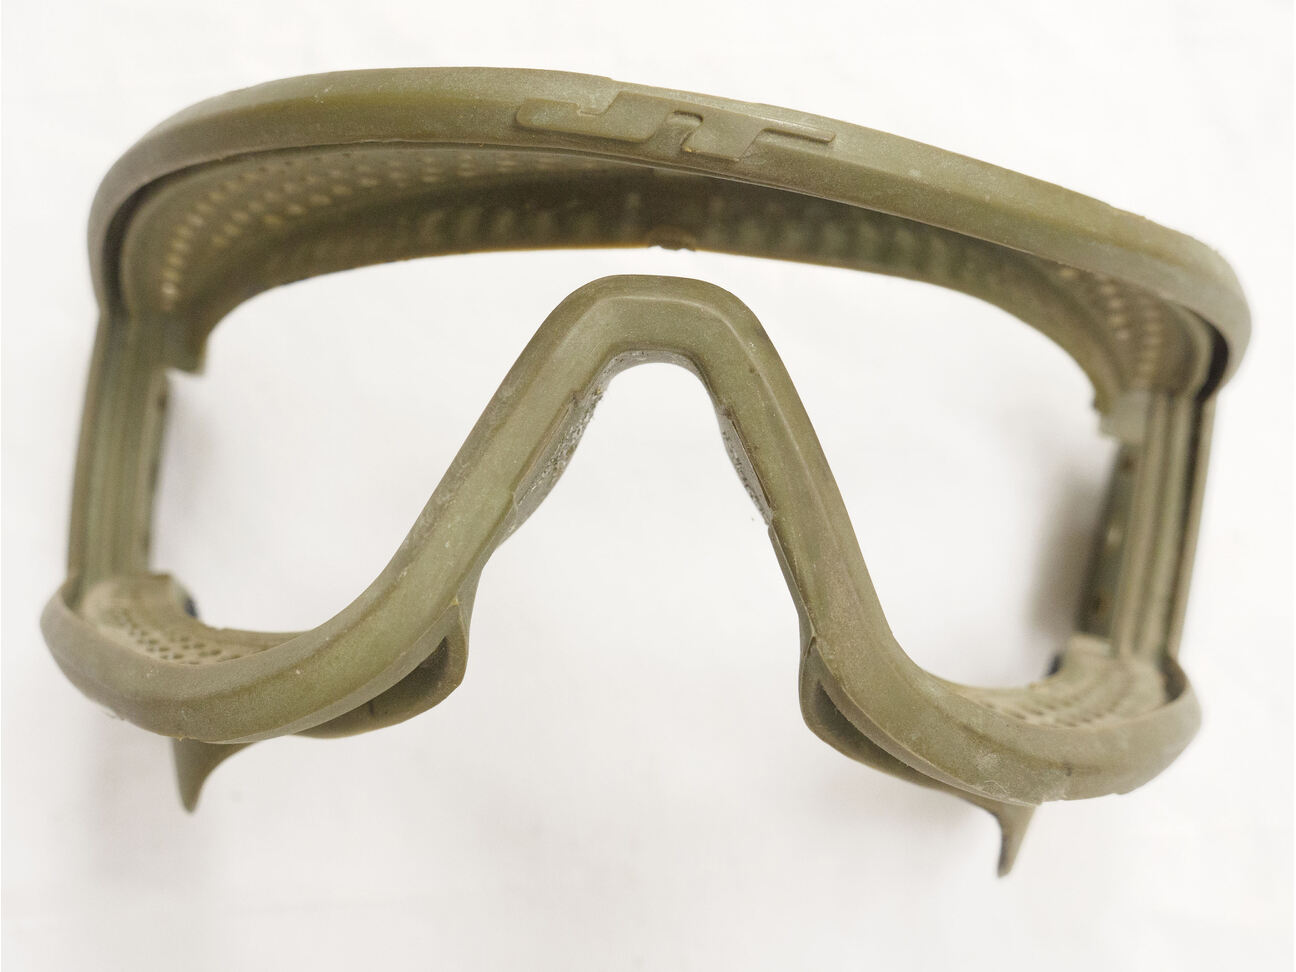 Classic green JT Spectra or Flex 7 Thin goggle frame